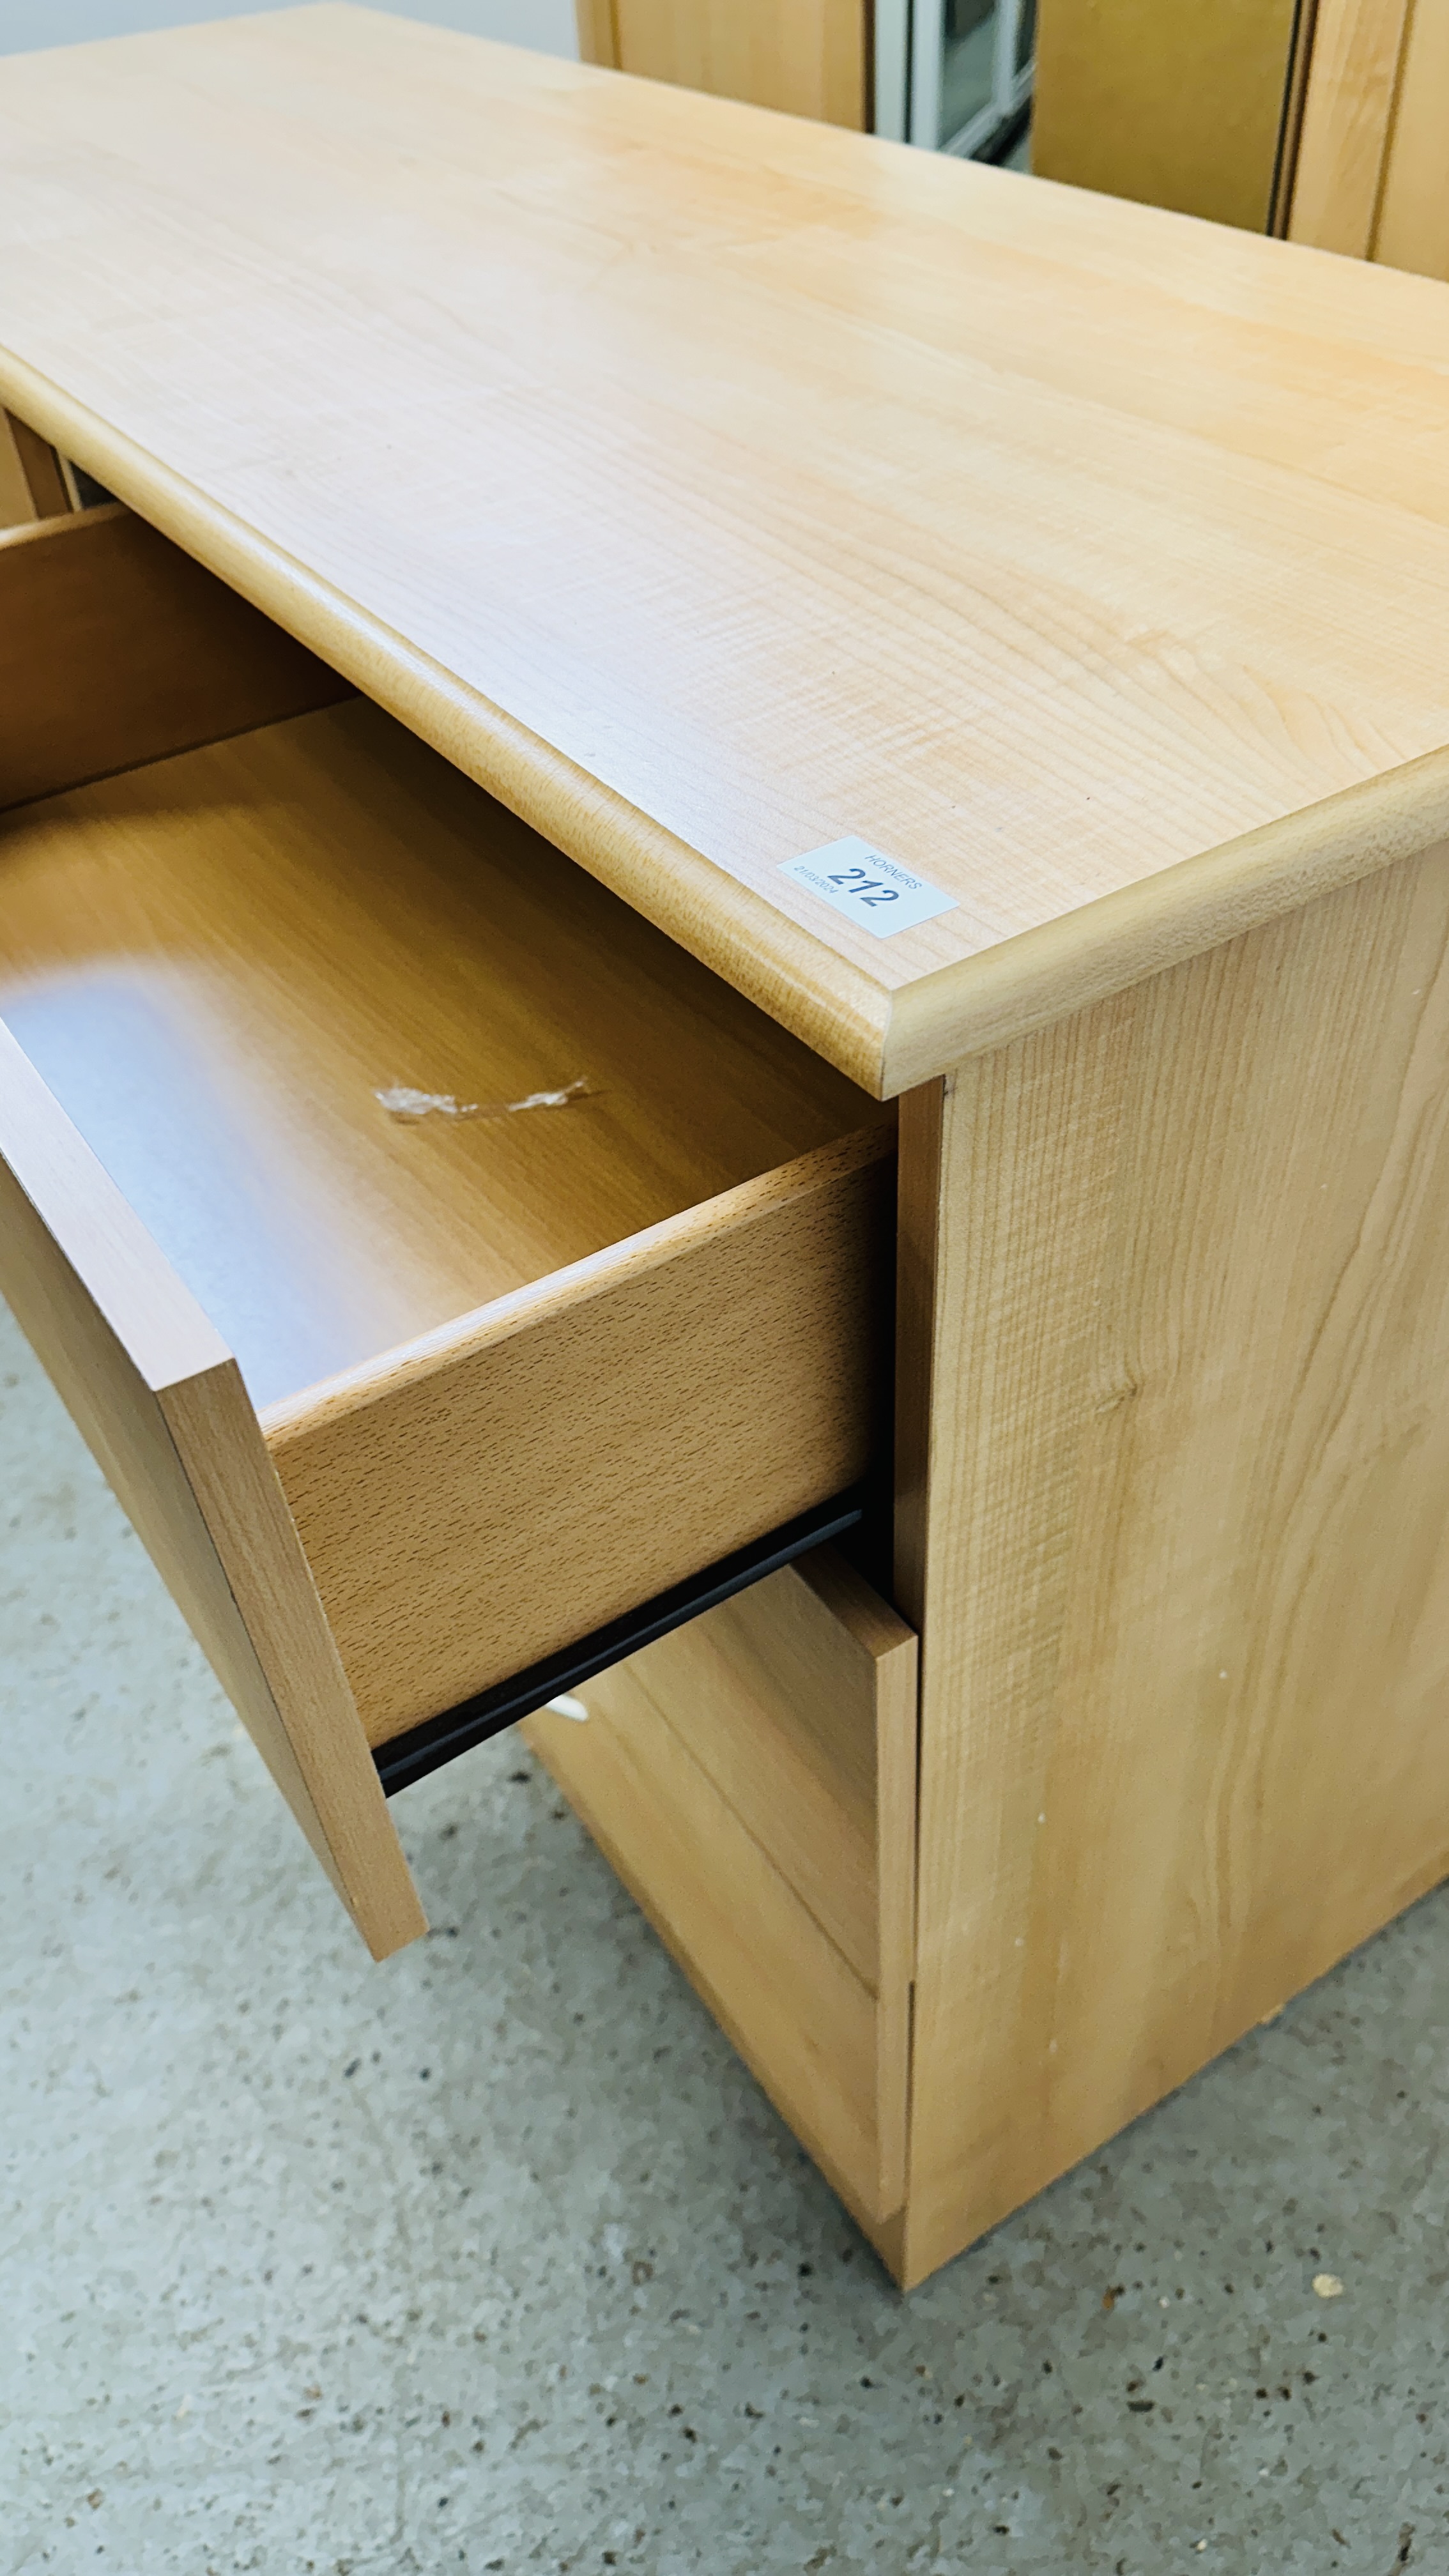 A MODERN 6 DRAWER BEECH FINISH CHEST W 122 X D 45 X H 74CM. - Image 6 of 13